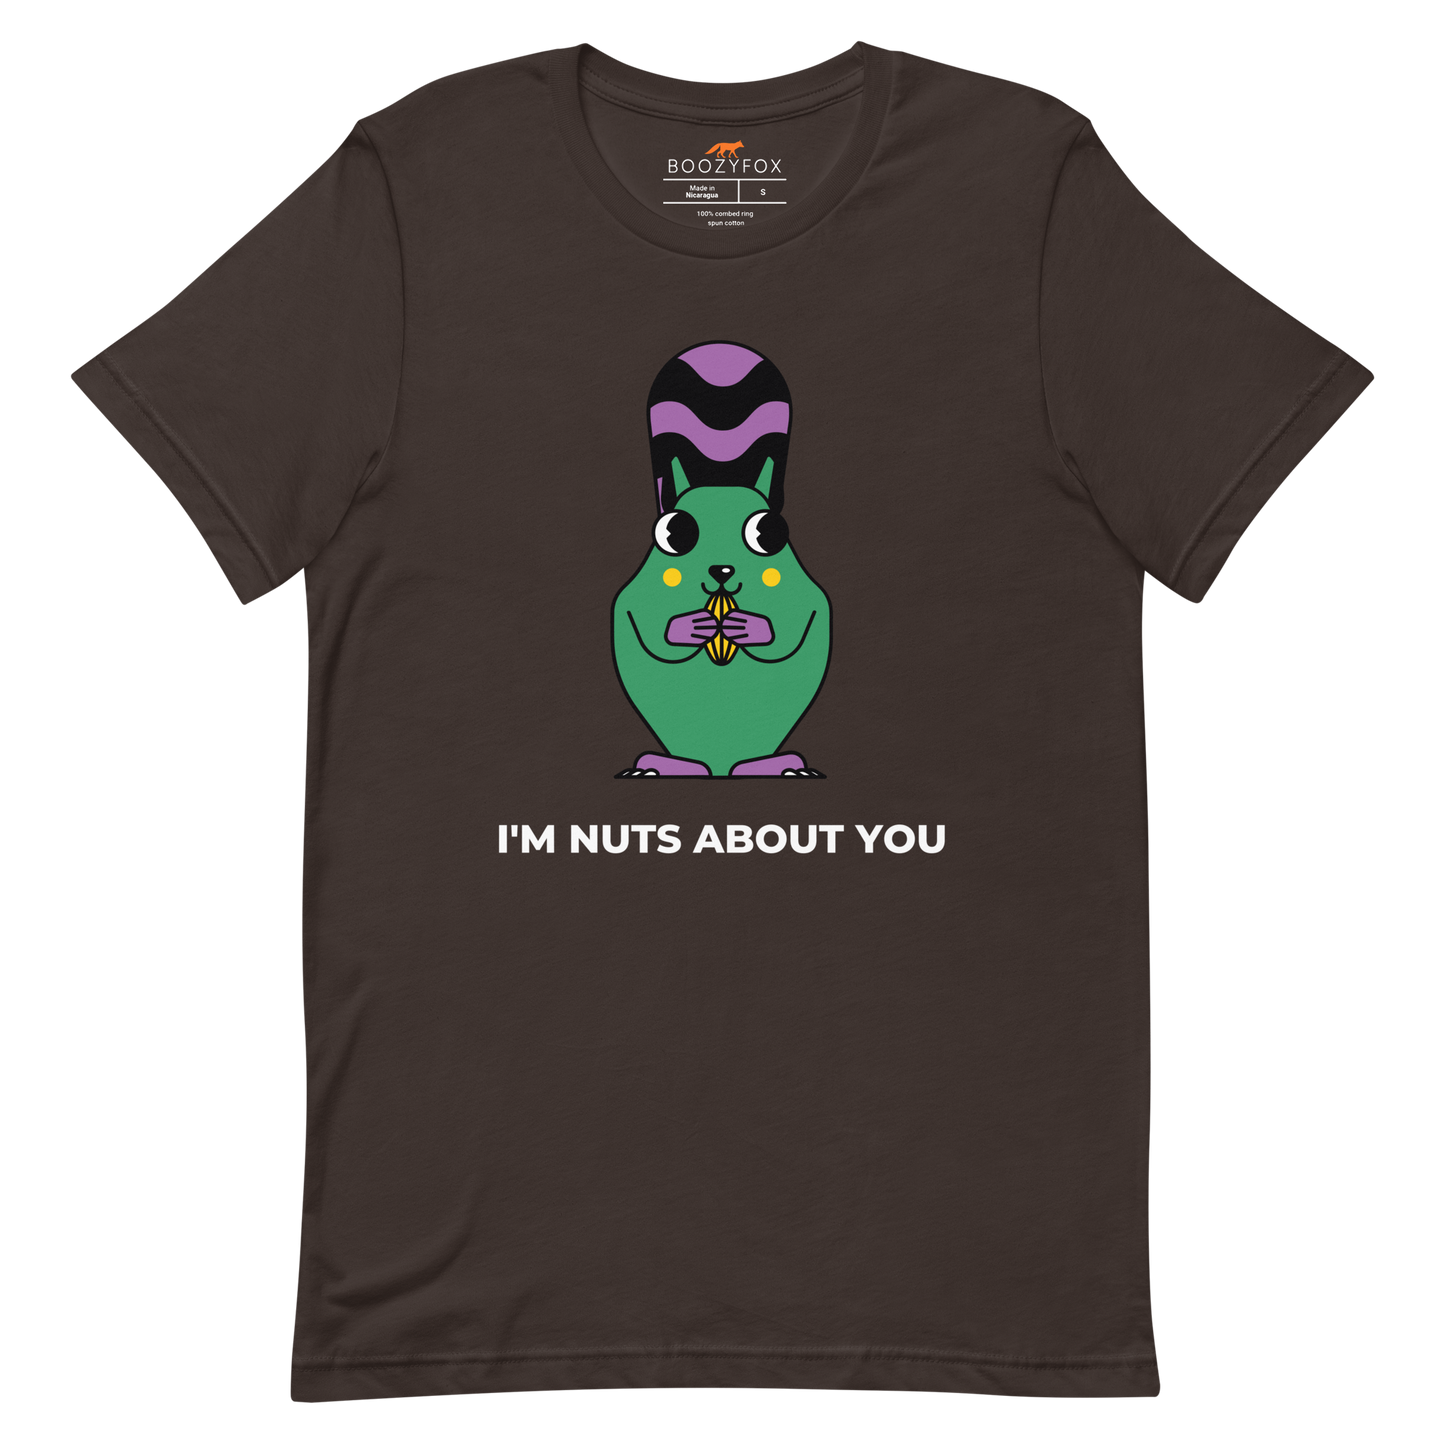 Brown Premium Squirrel T-Shirt featuring an I'm Nuts About You graphic on the chest - Funny Graphic Squirrel Tees - Boozy Fox